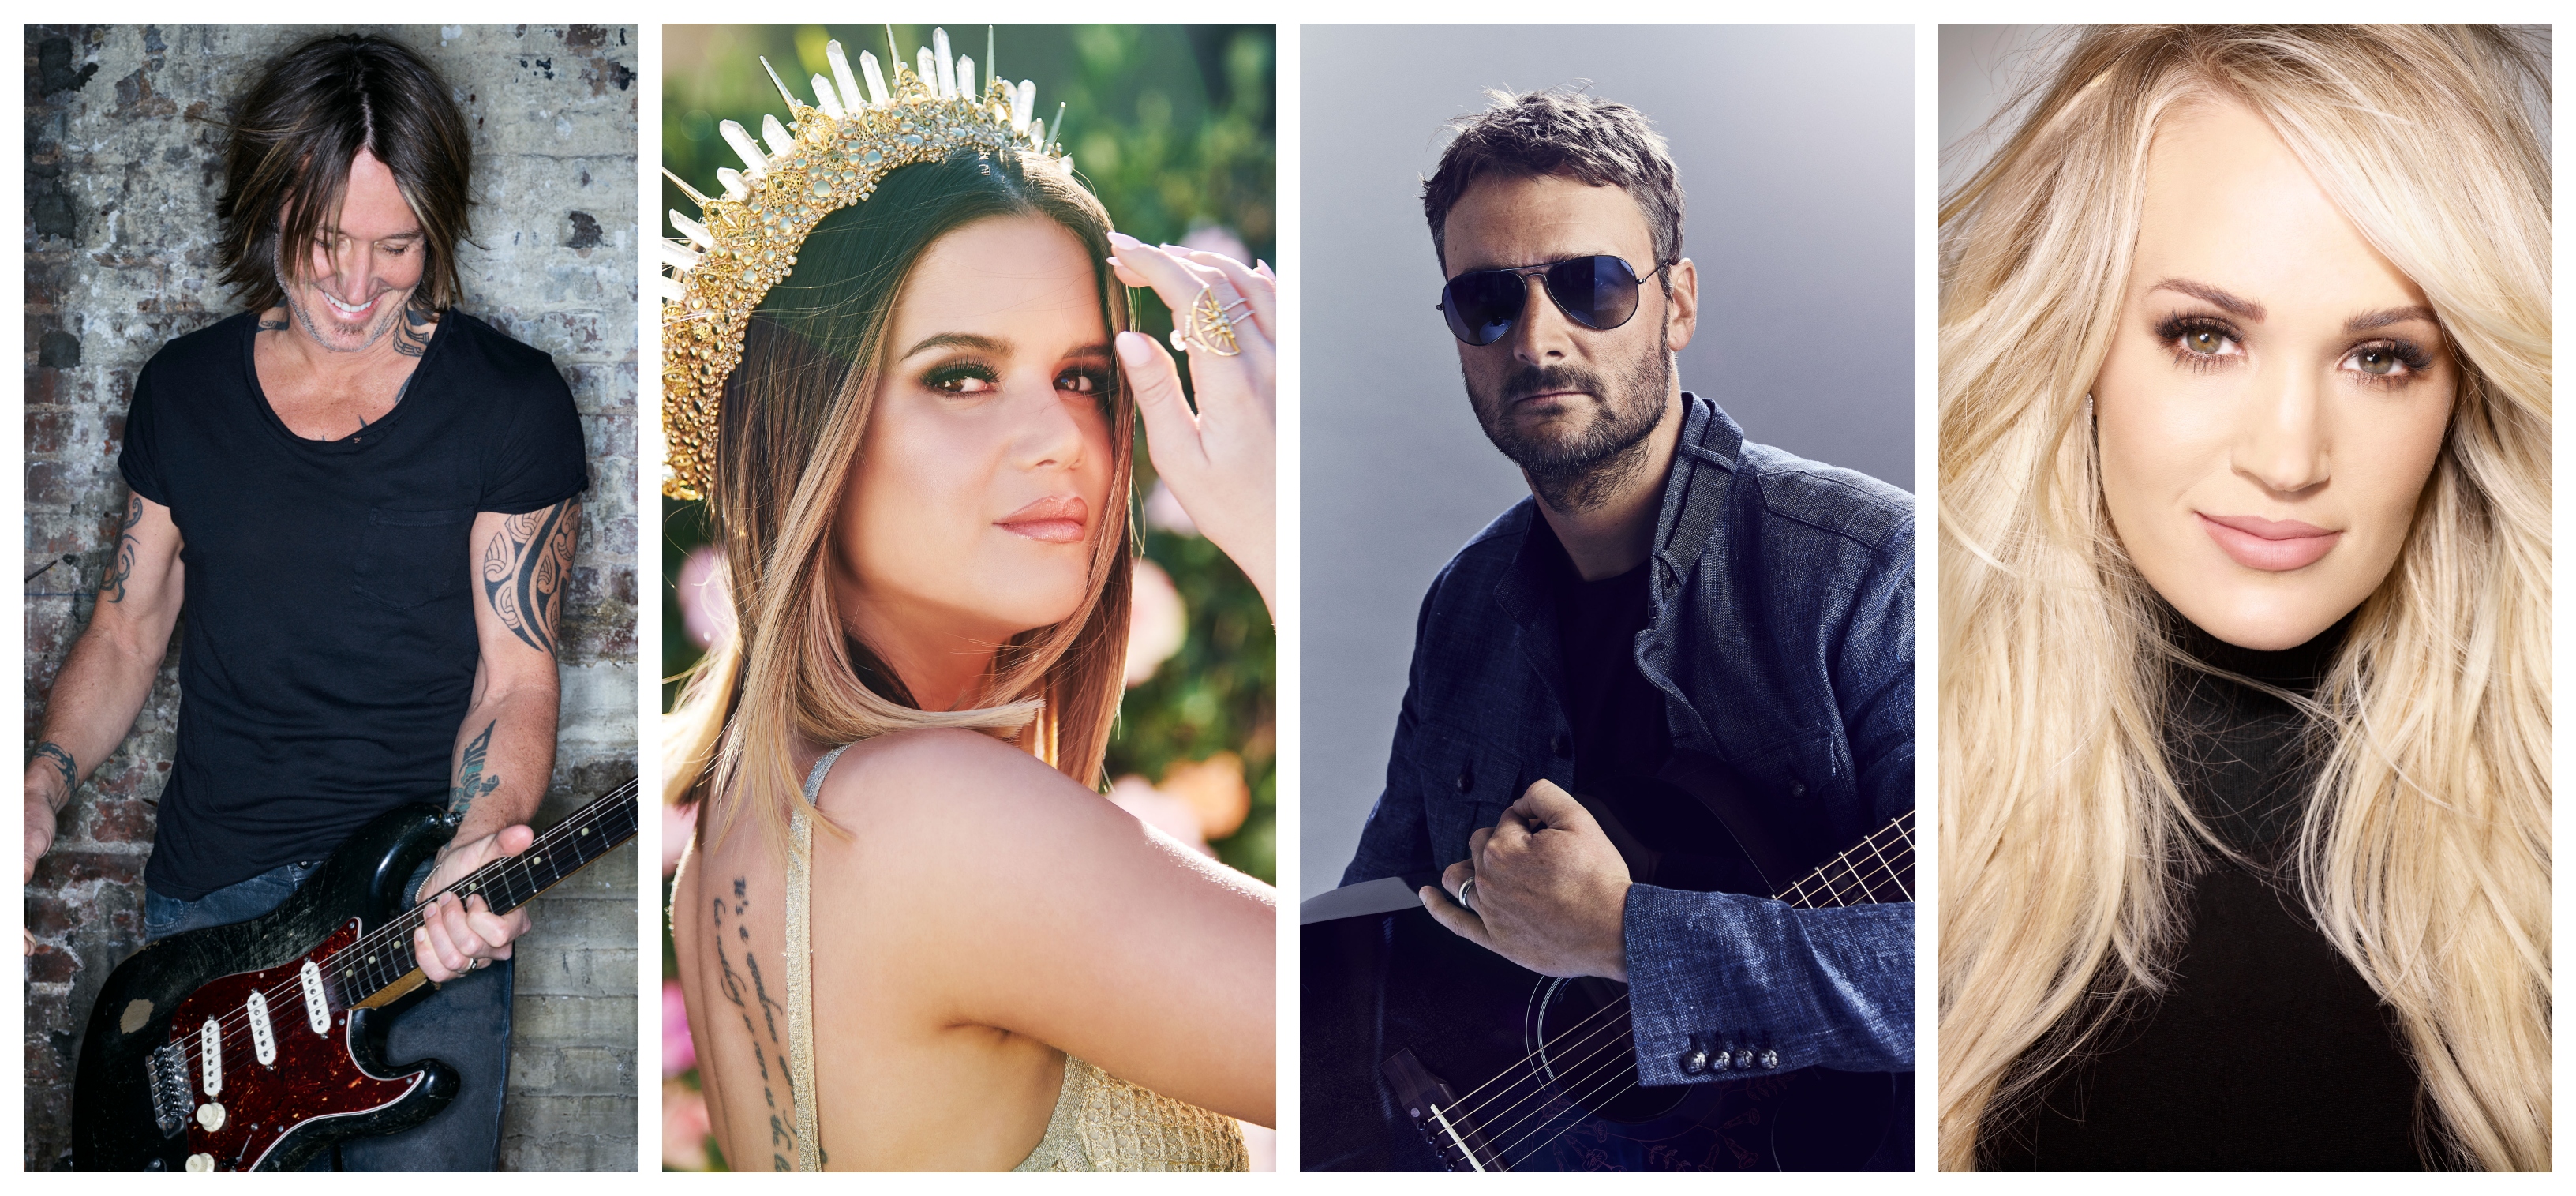 Keith Urban, Maren Morris, Eric Church and Carrie Underwood Among Performers for the 2019 CMA Awards